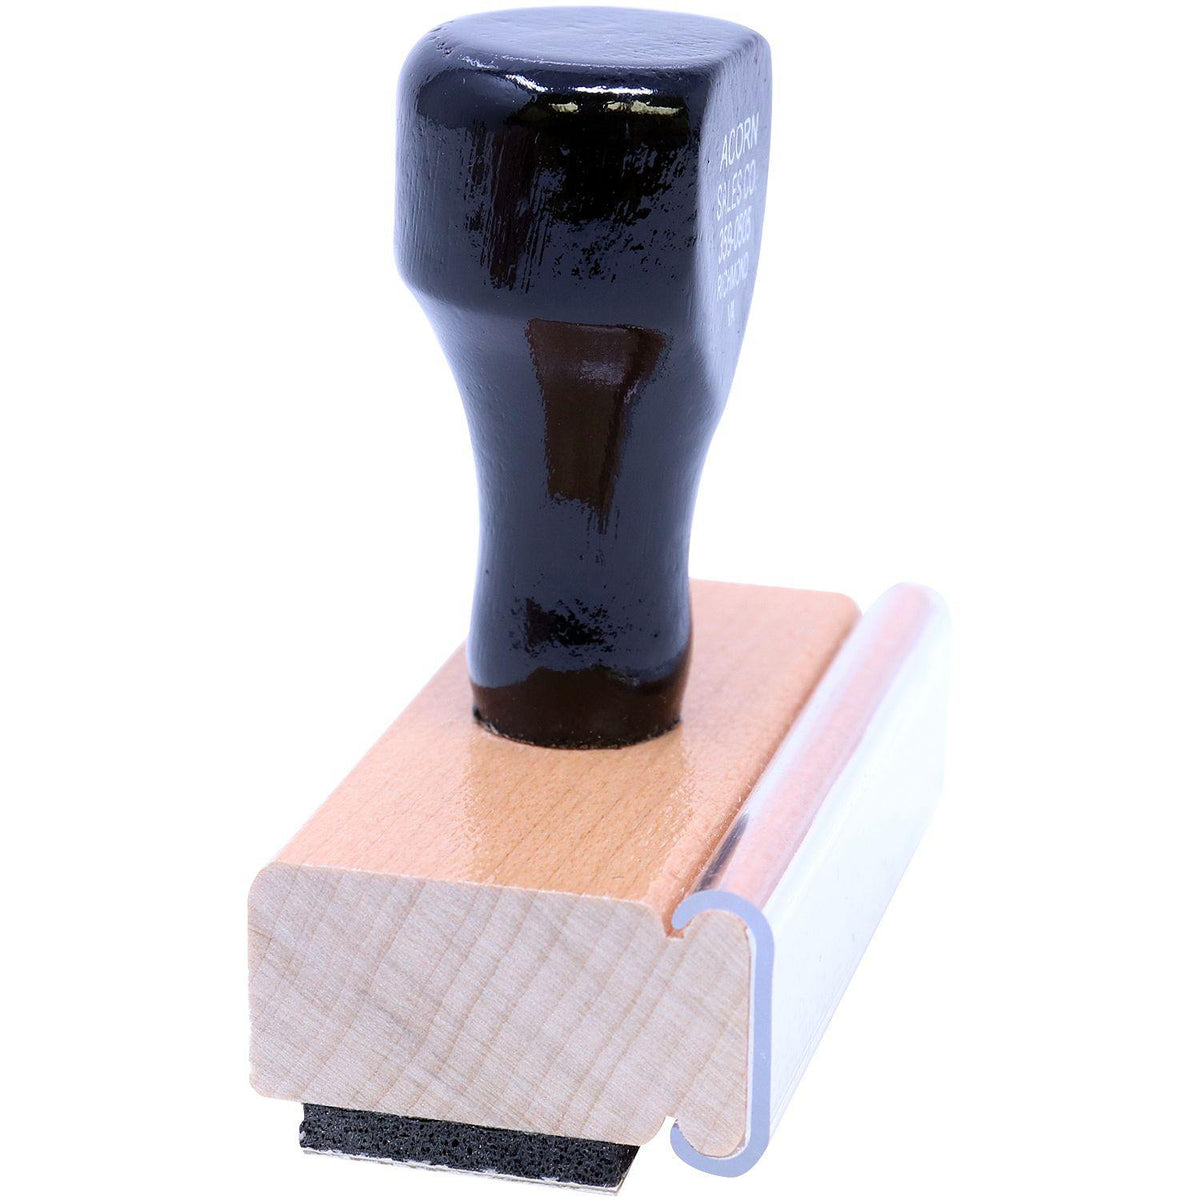 Side View of Large Curley Past Due Rubber Stamp at an Angle